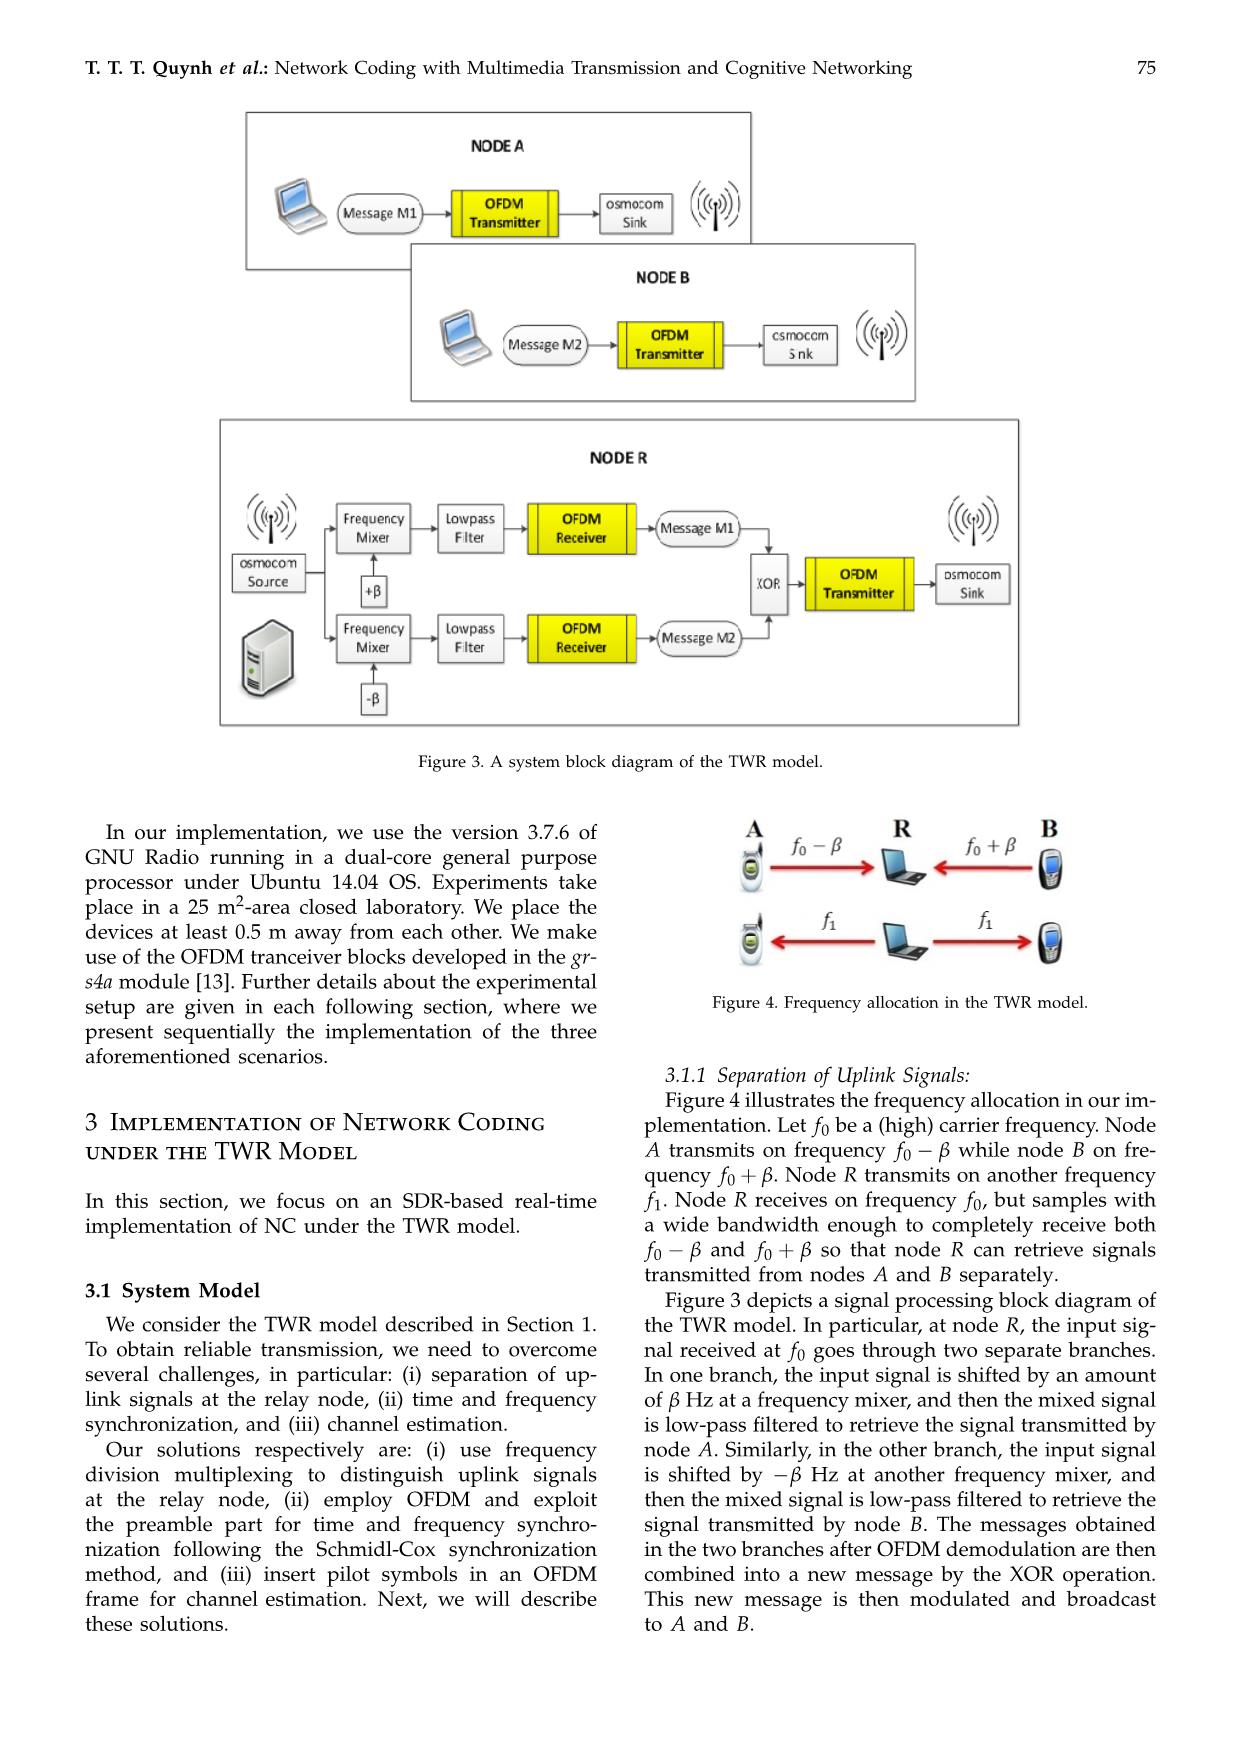 Network coding with multimedia transmission and cognitive networking: An implementation based on software-defined radio trang 4